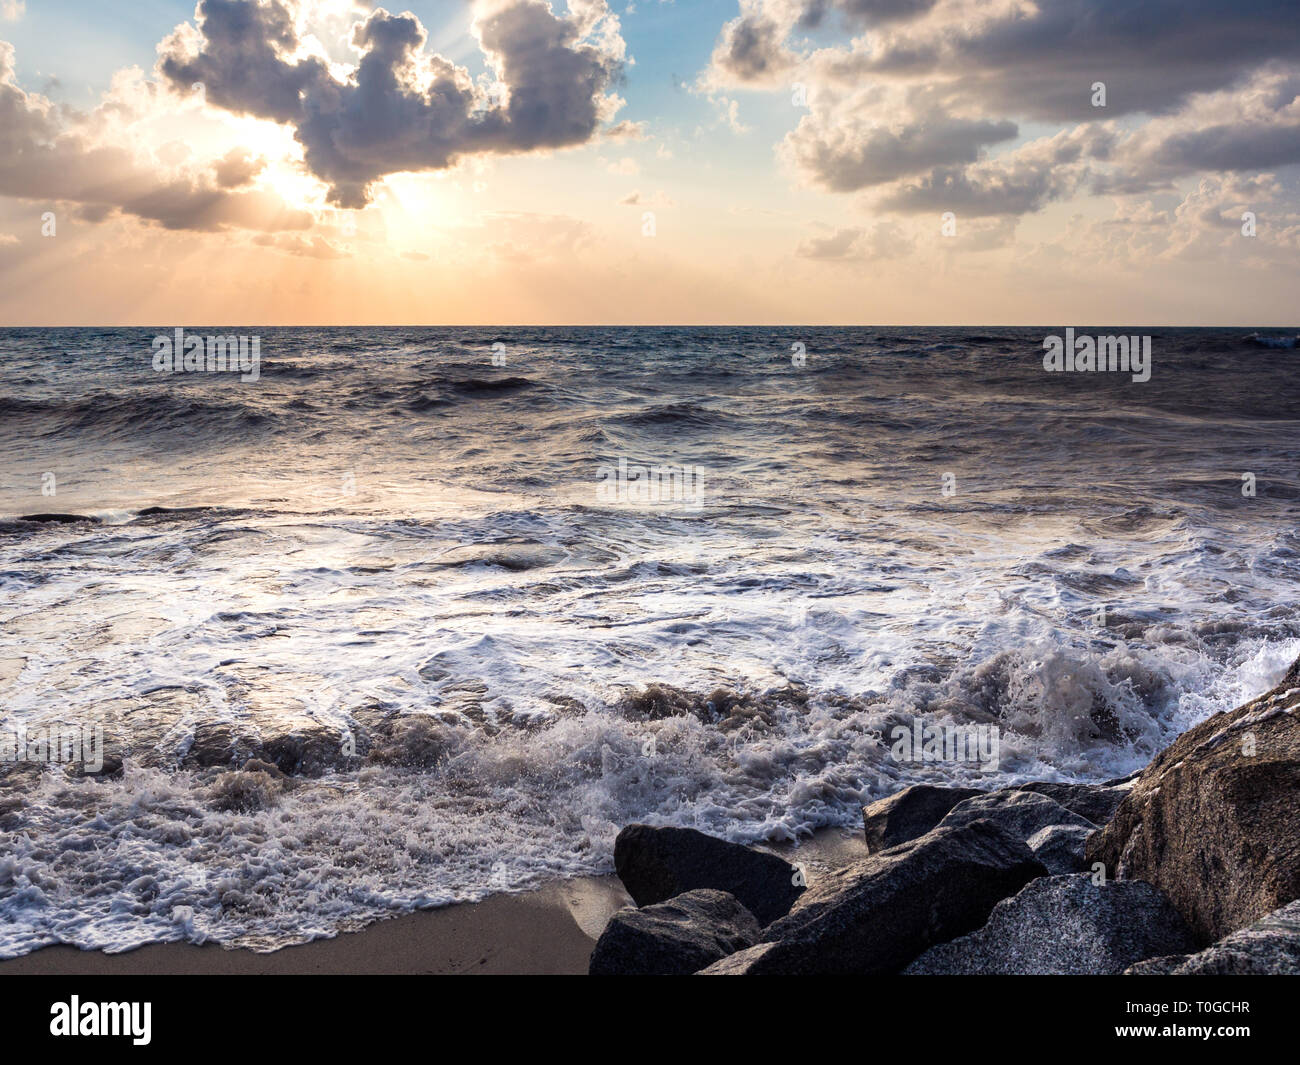 Sunset beach with rough seas and crashing waves. Stock Photo